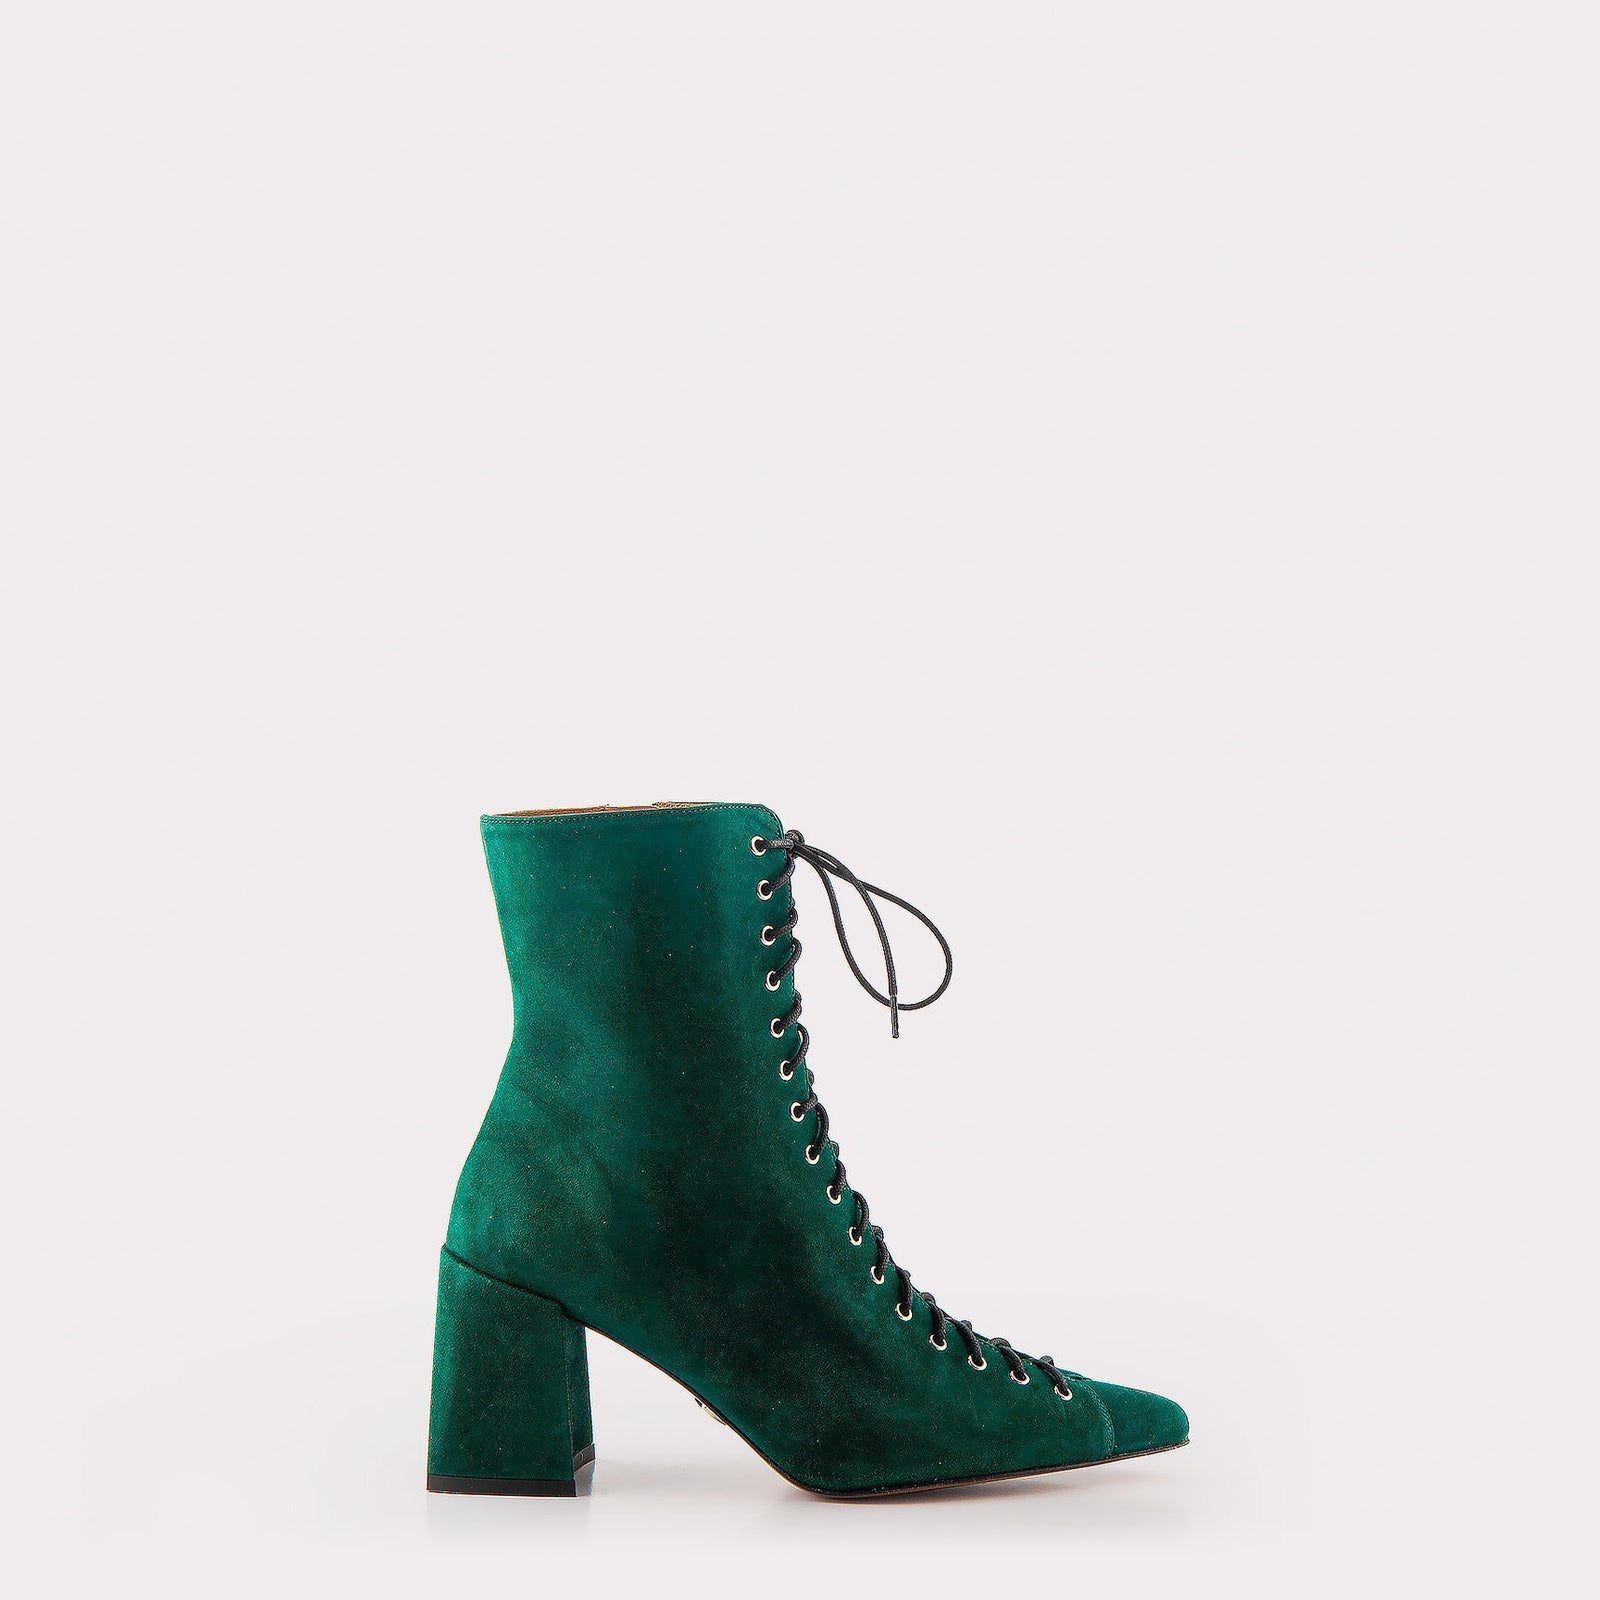 JOLIE 01 MOSS GREEN SUEDE LEATHER ANKLE BOOTS